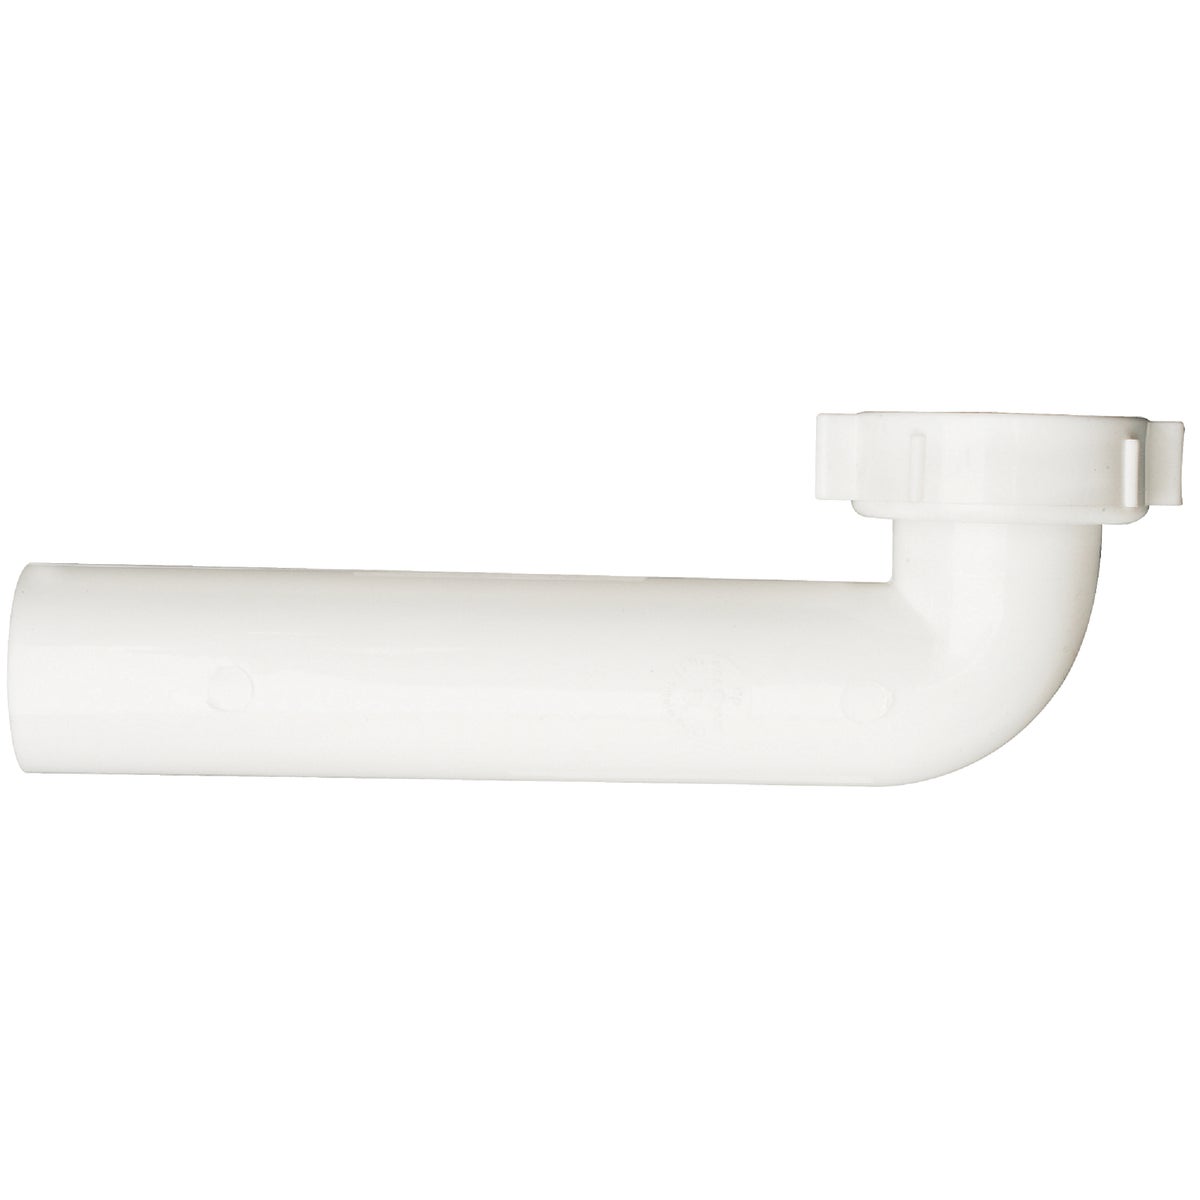 Item 441793, Waste arm 1-1/2" x 7" direct connect plastic